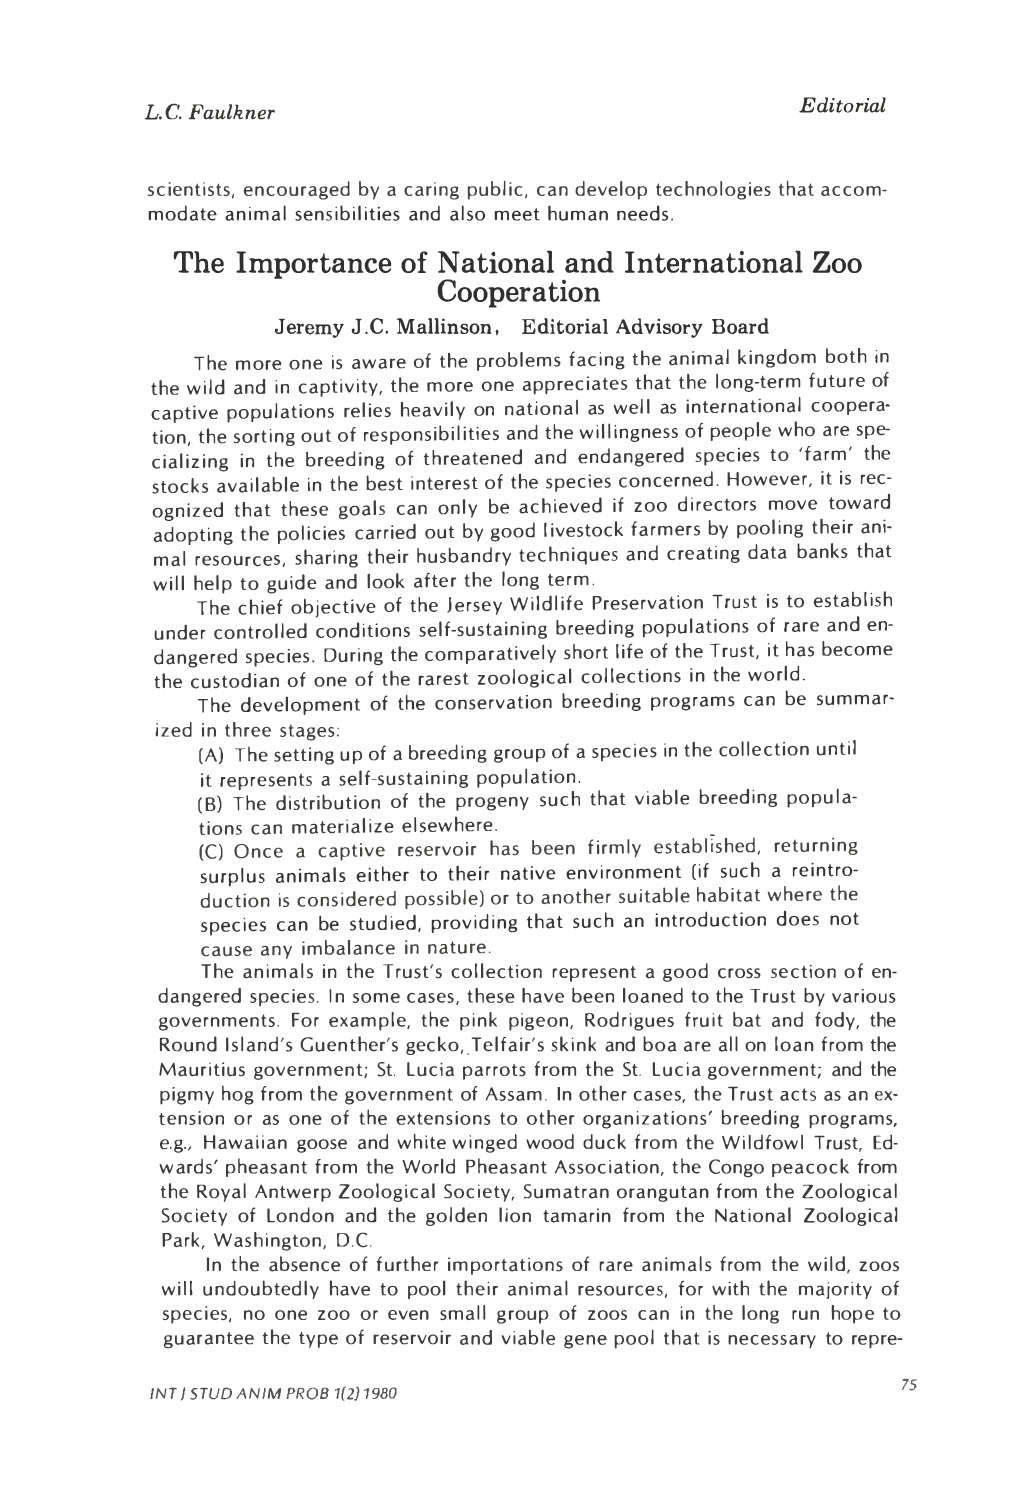 The Importance of National and International Zoo Cooperation